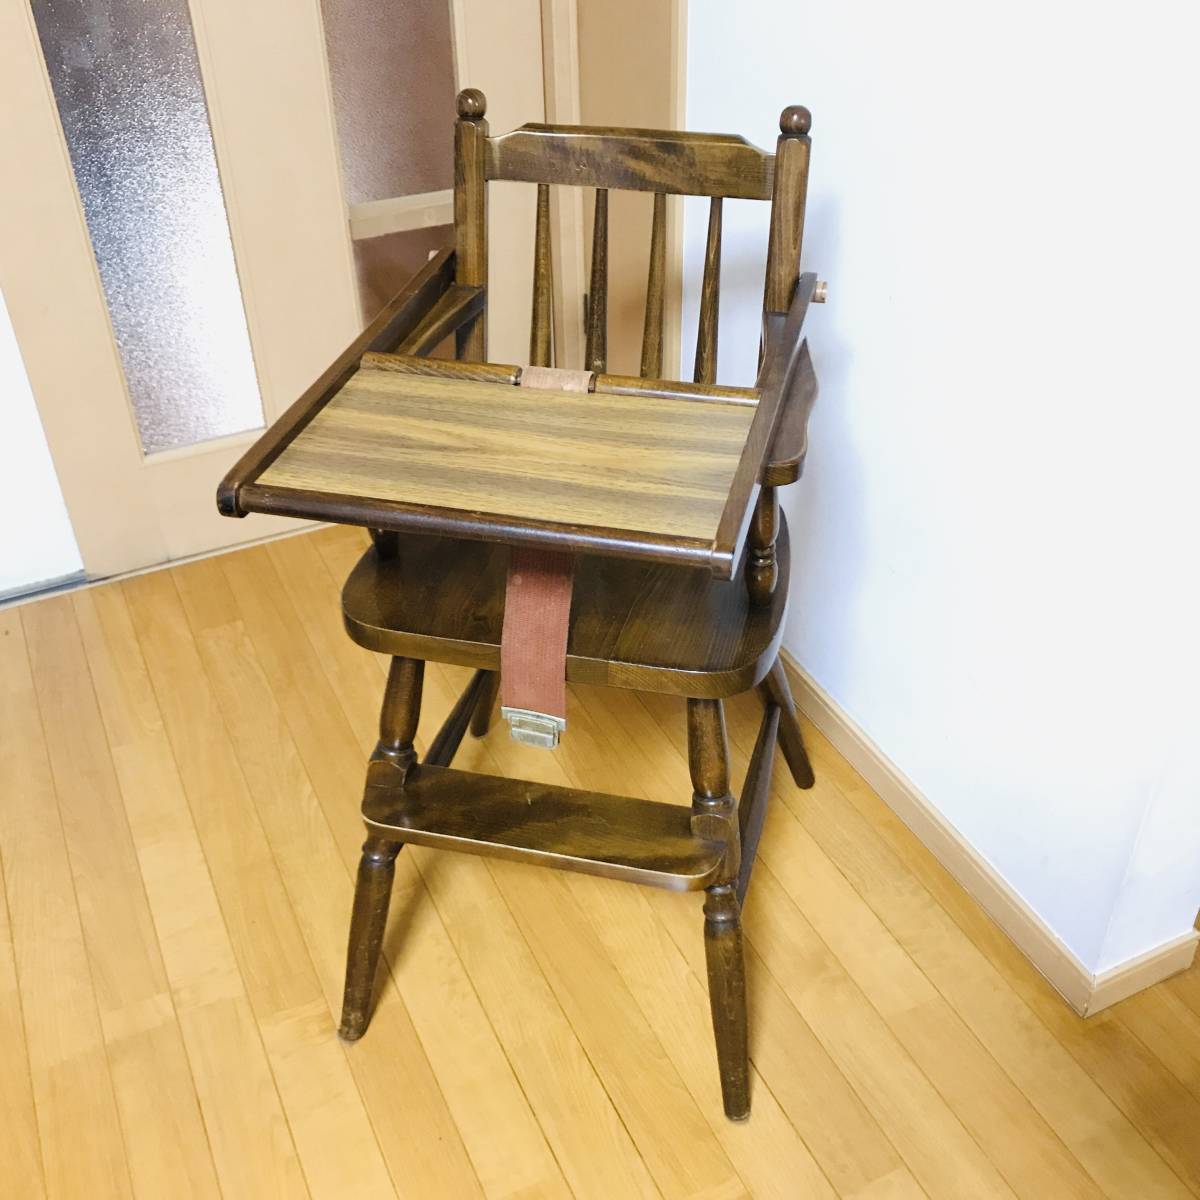 * free shipping * anonymity delivery *.. furniture Kashiwa woodworking baby chair high chair KASHIWA belt, table attaching 